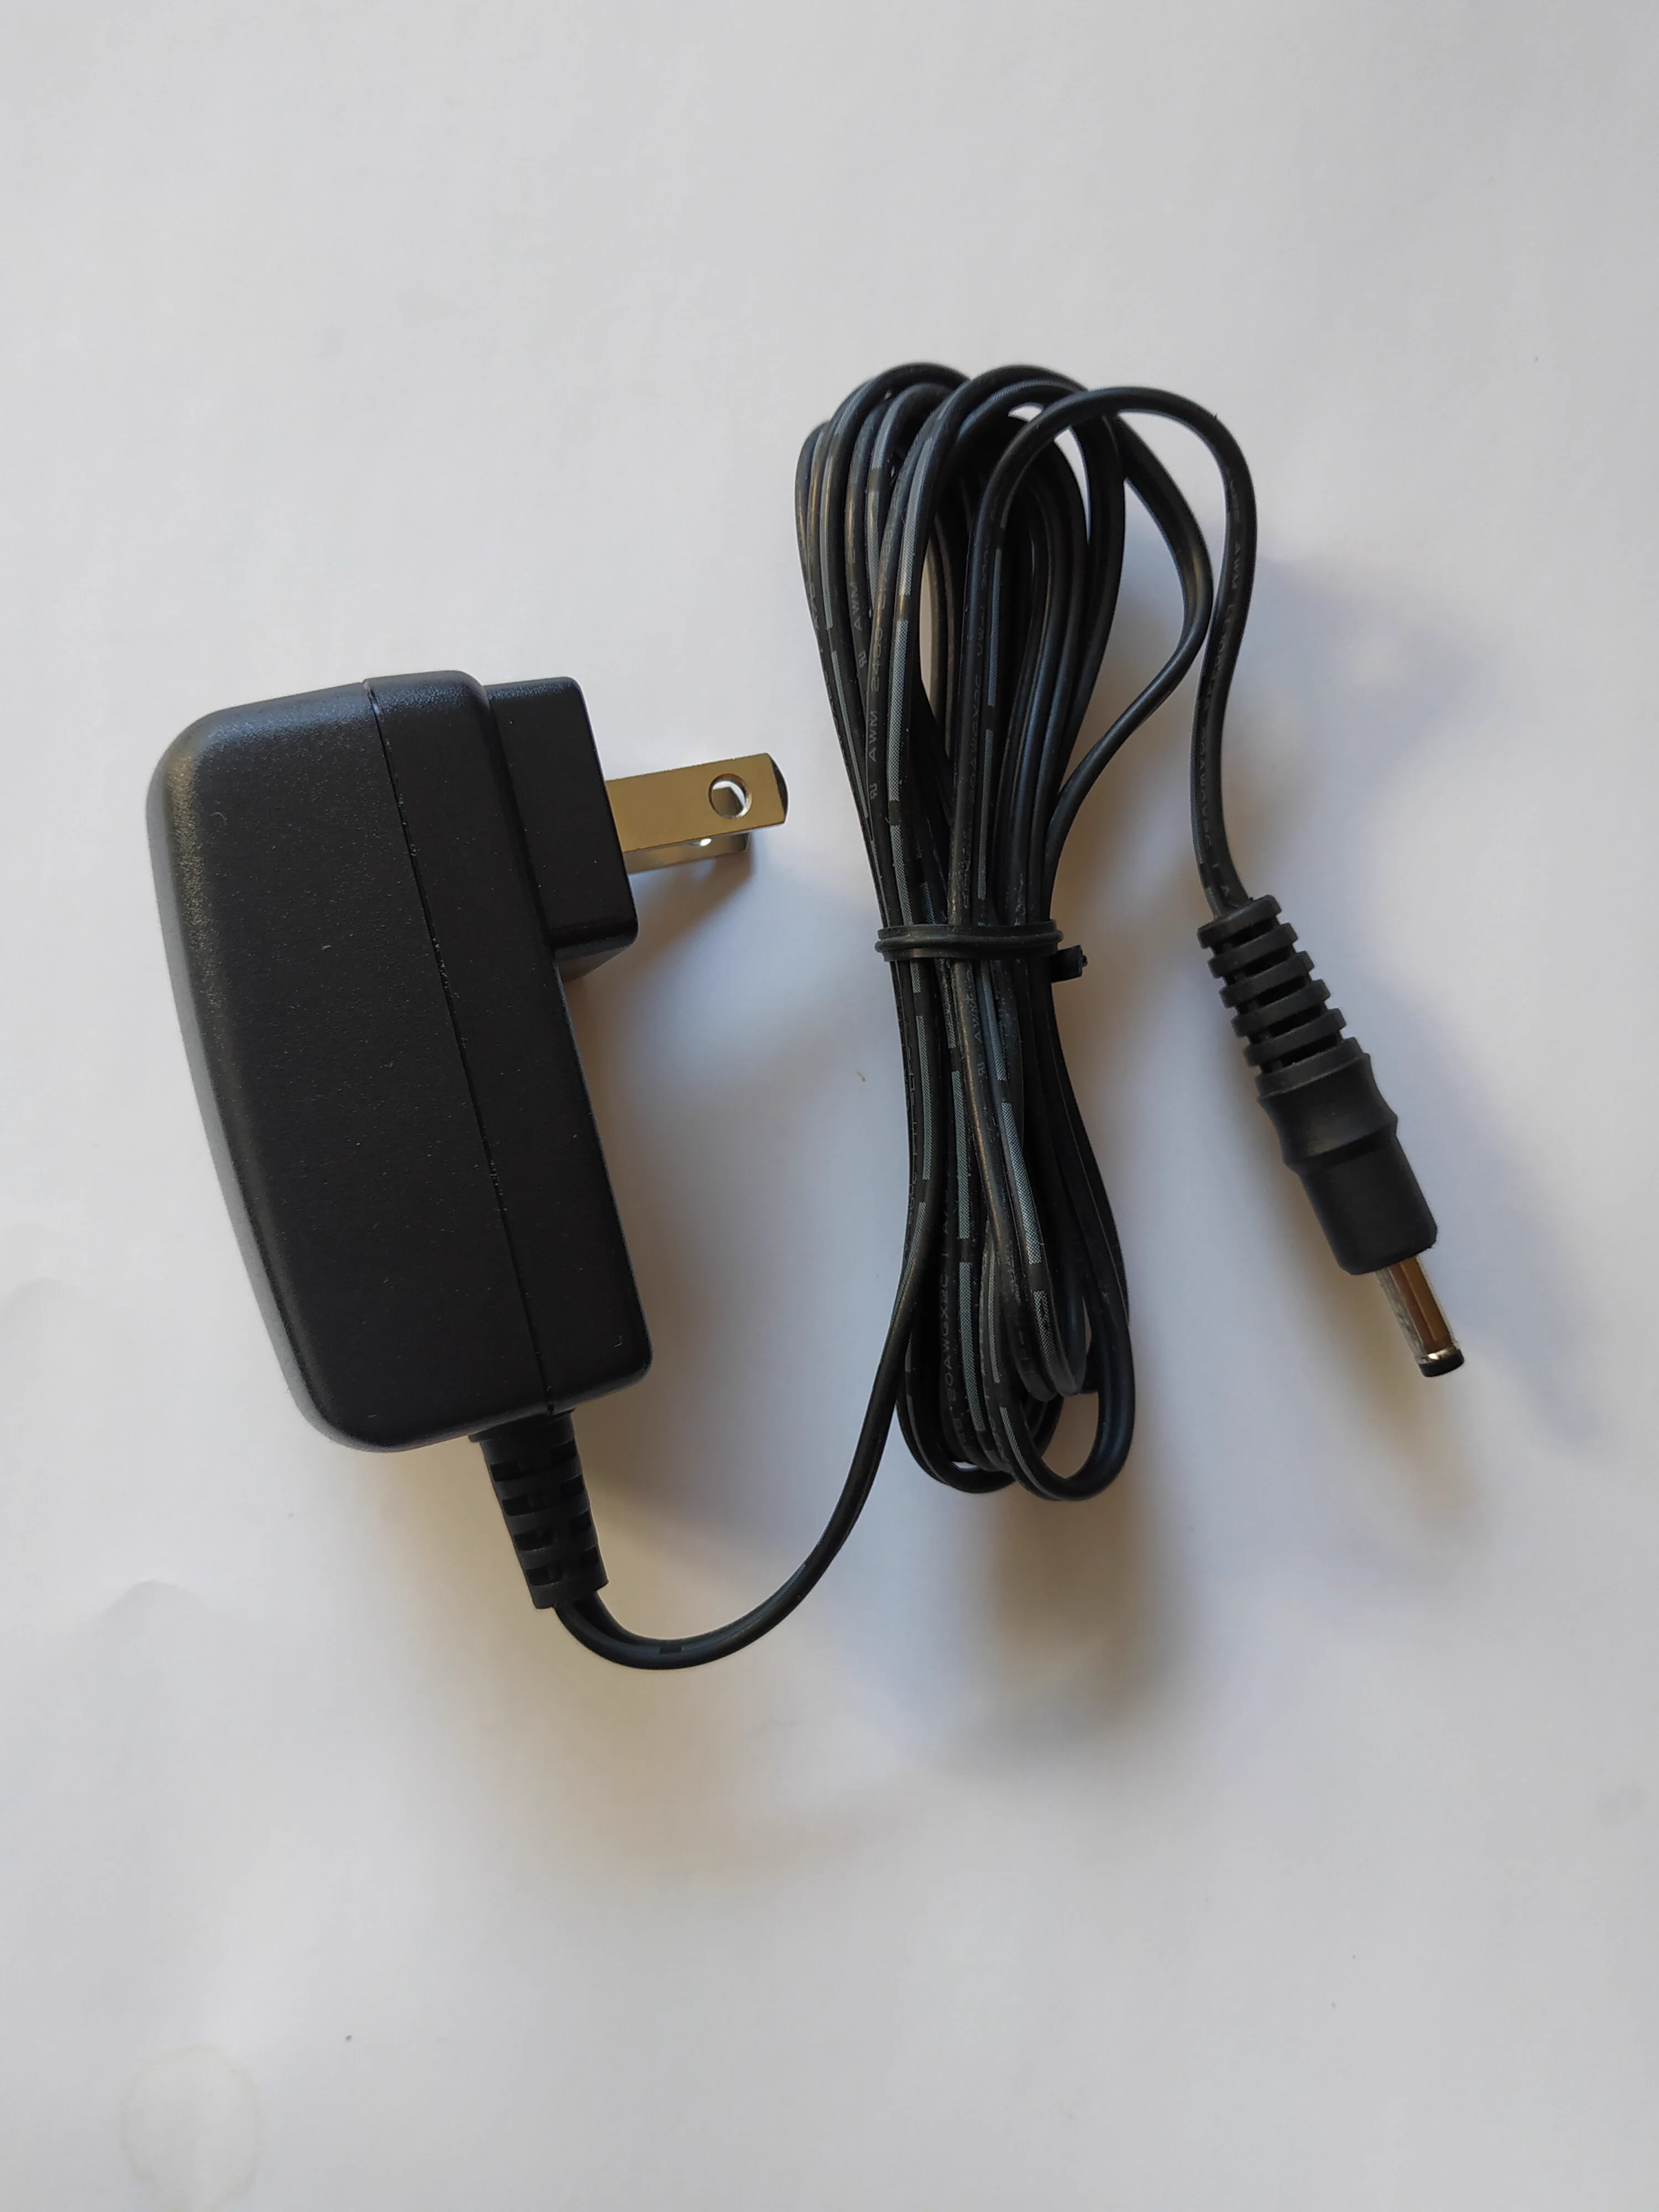 *Brand NEW* UP0181B-05PA D-LINK 5V 2A AC ADAPTER Power Supply